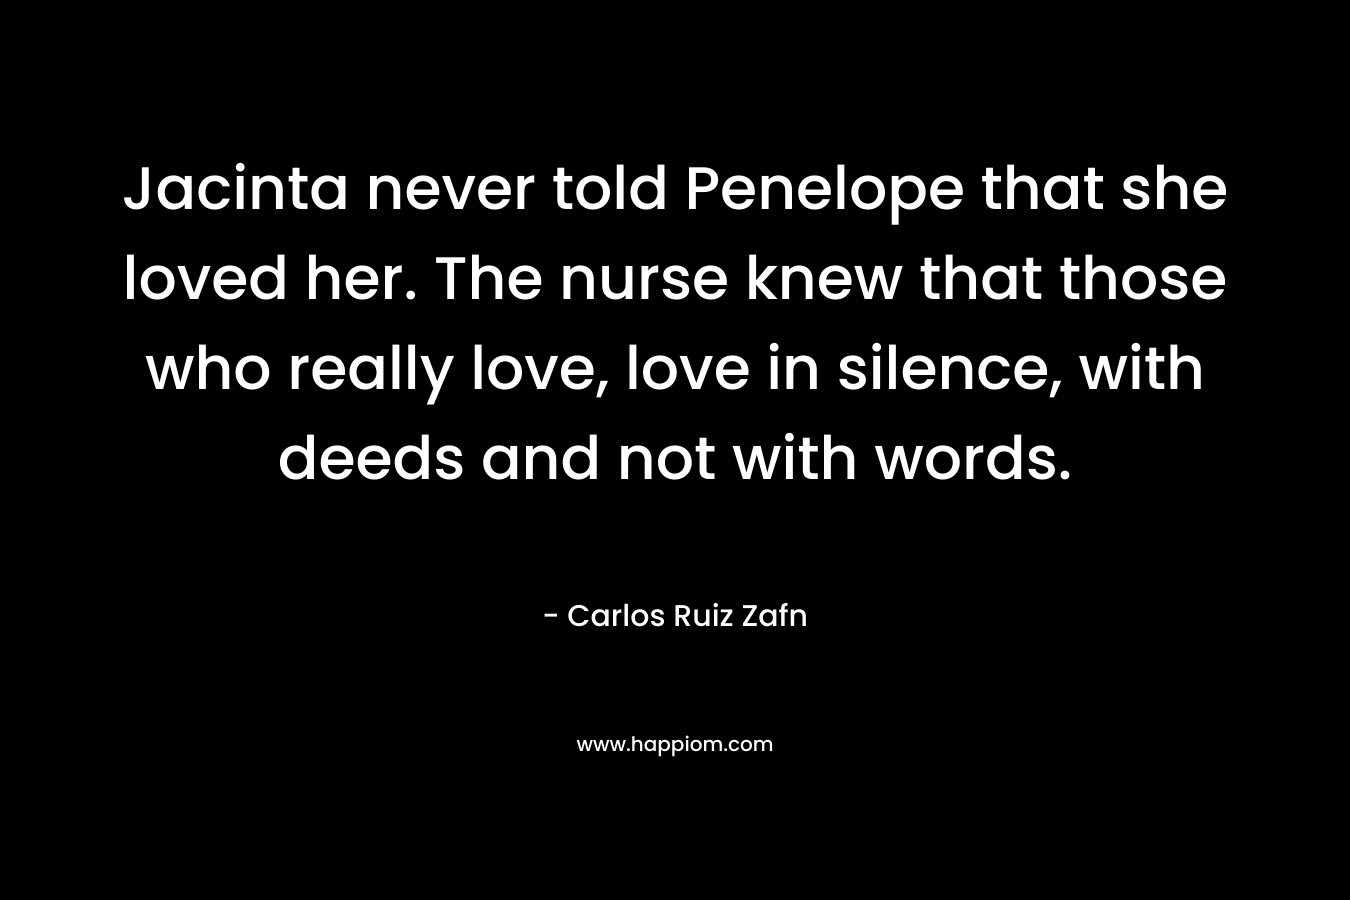 Jacinta never told Penelope that she loved her. The nurse knew that those who really love, love in silence, with deeds and not with words.